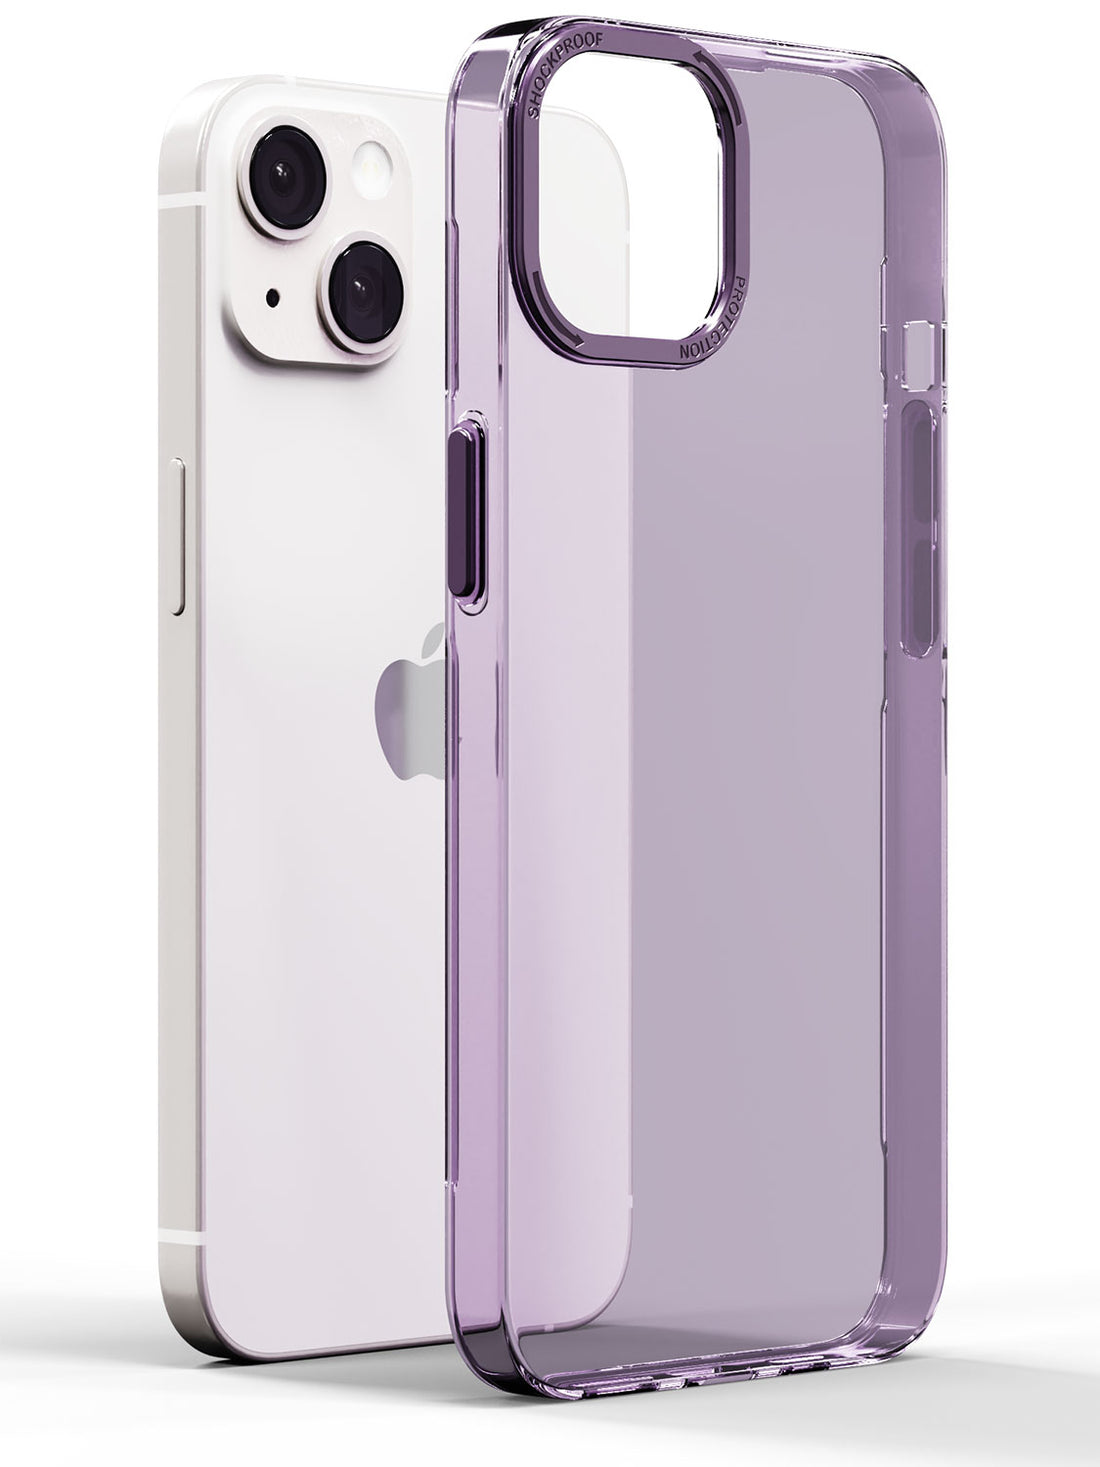 shockproof case cover for iphone 12 pro max , shockproof back cover for iphone 12 pro max , clear case for iphone 12 pro max , transparent cases and covers for iphone 12 pro max , non-yellowing case for iphone 12 pro max